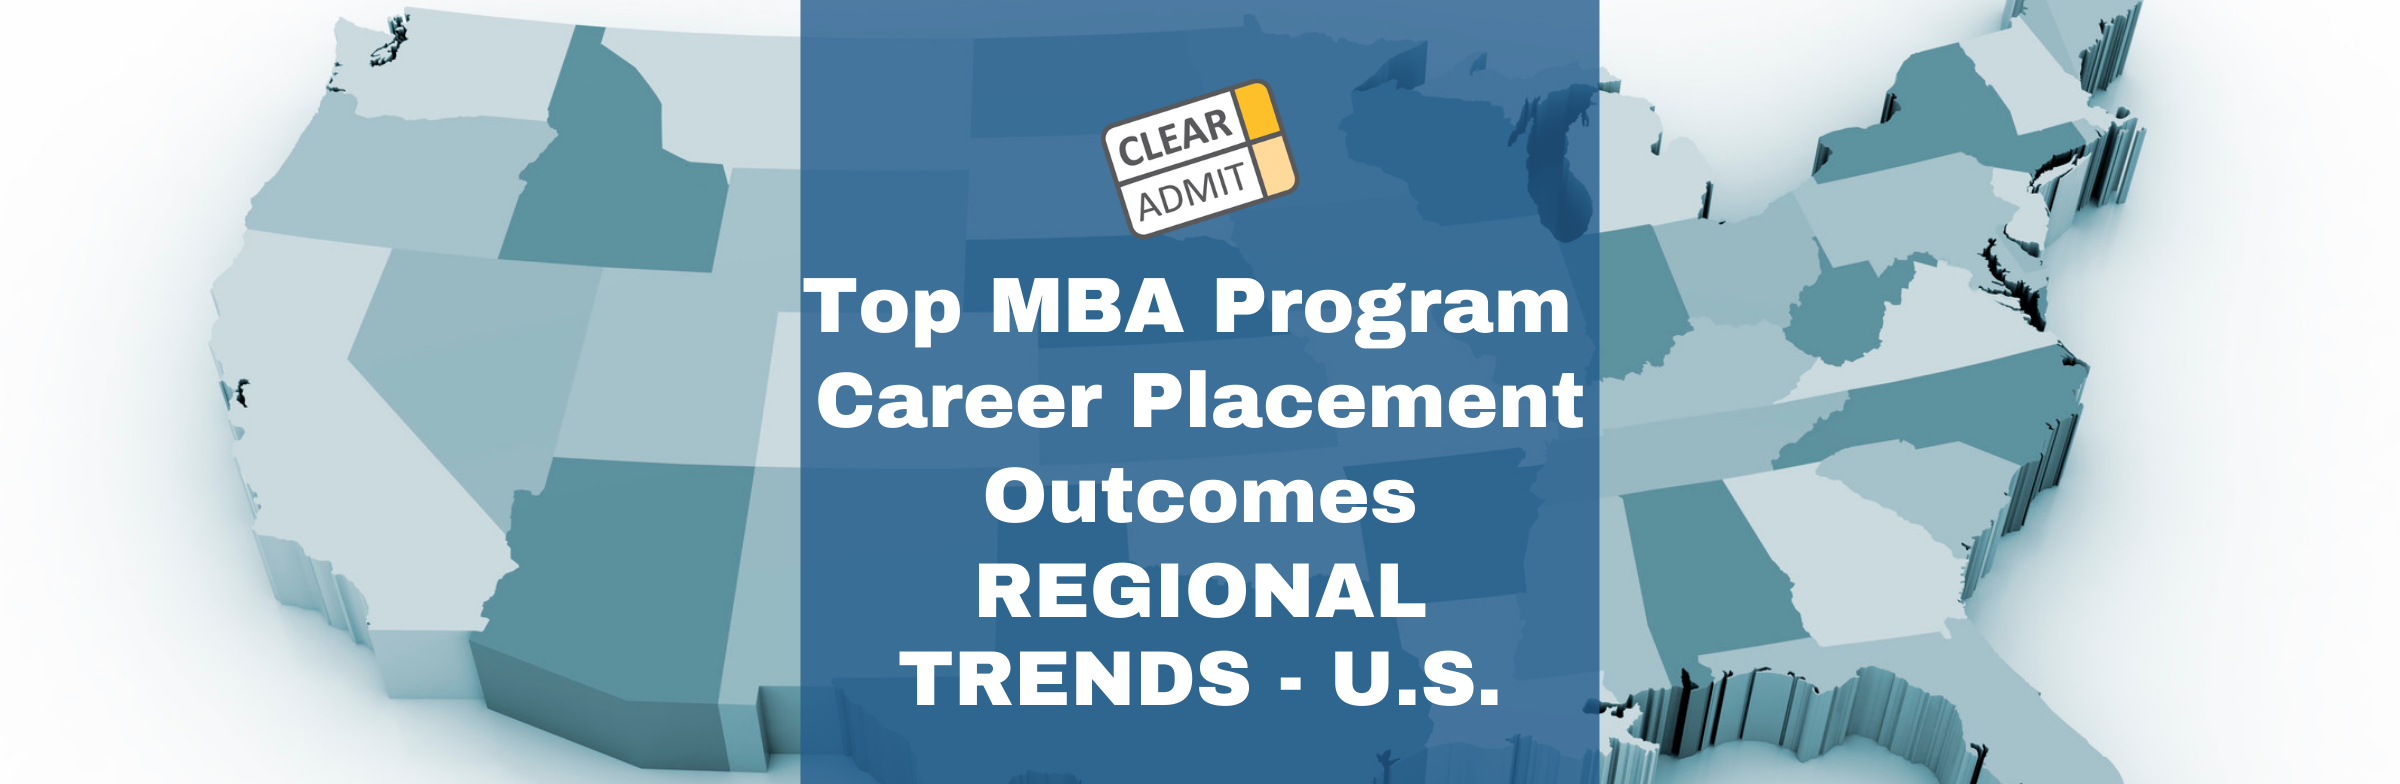 Image for Top MBA Career Placement Outcomes: Trends by U.S. Region